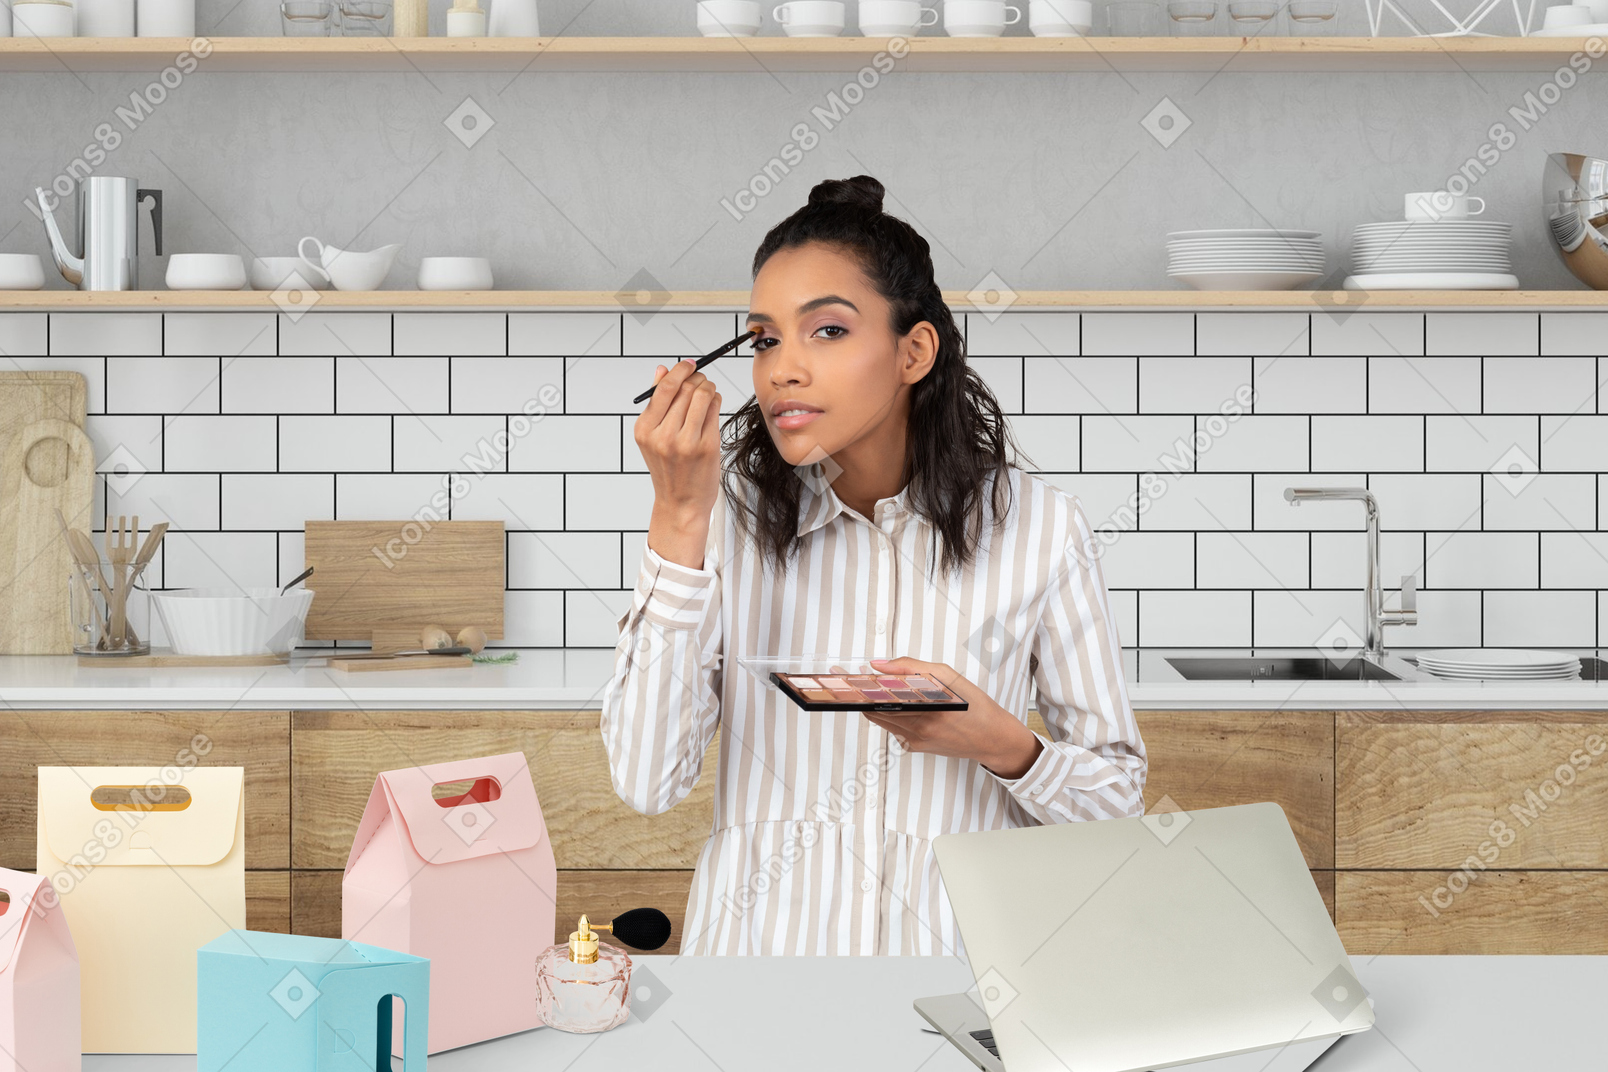 A woman applying eyeshadows at the table with products